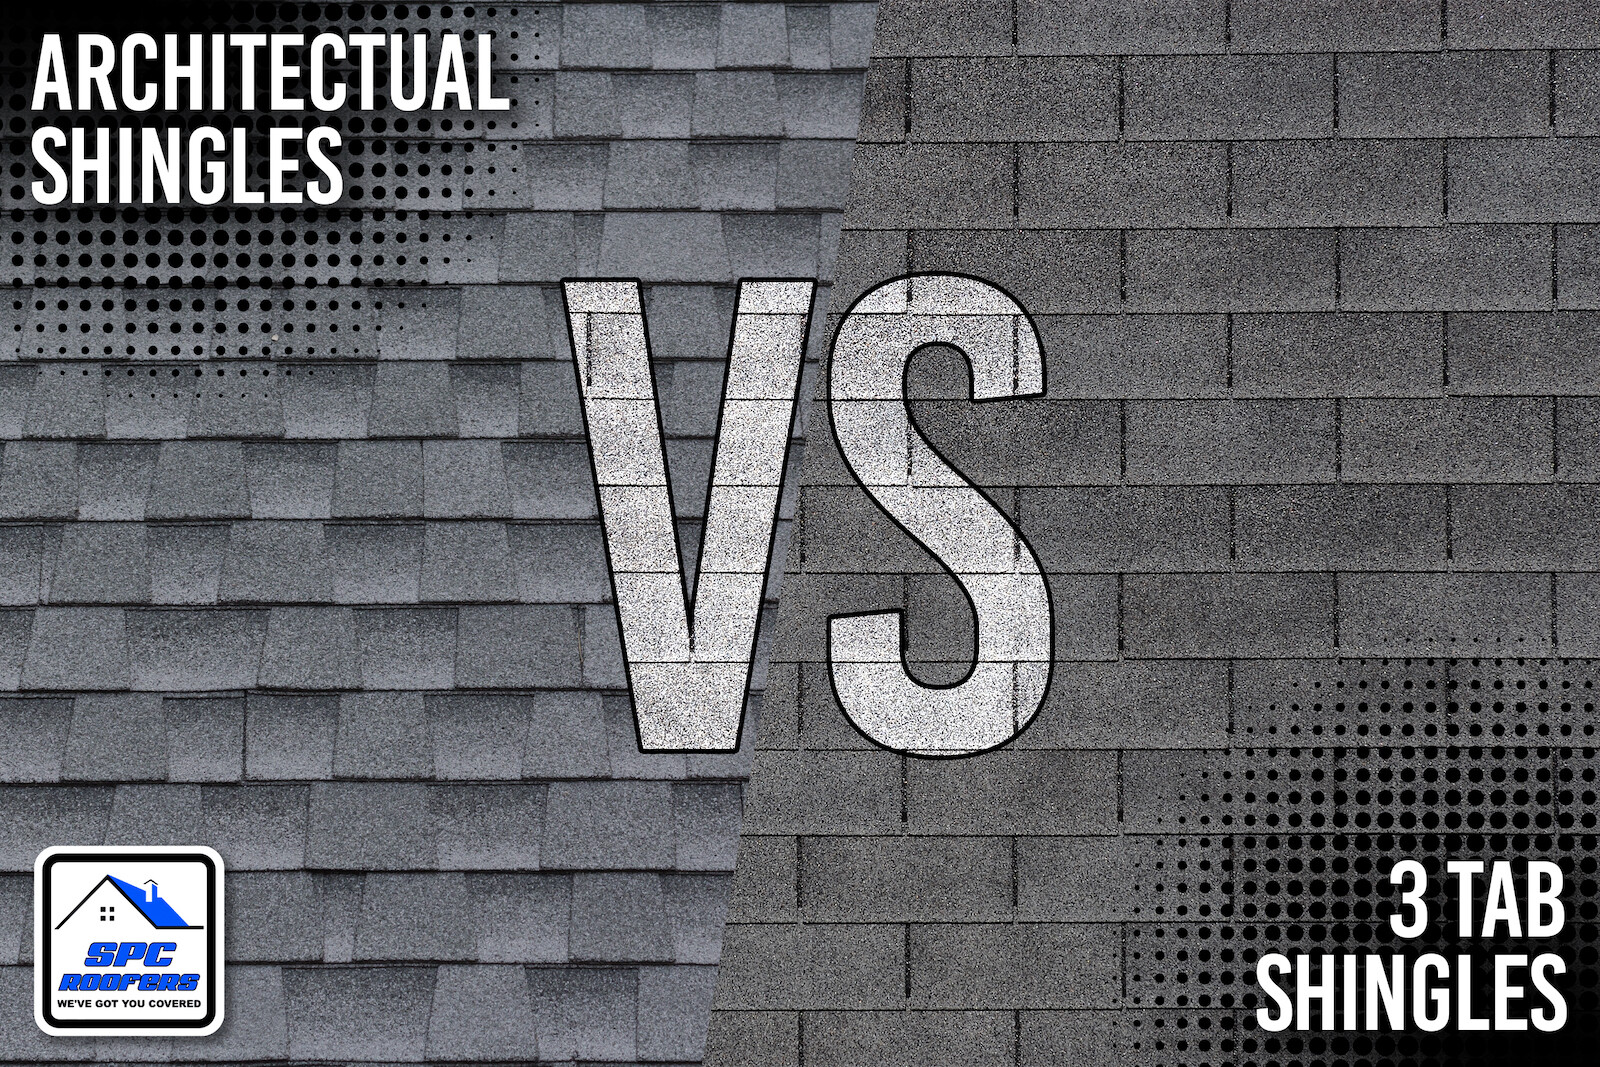 Choosing shingles for your roof